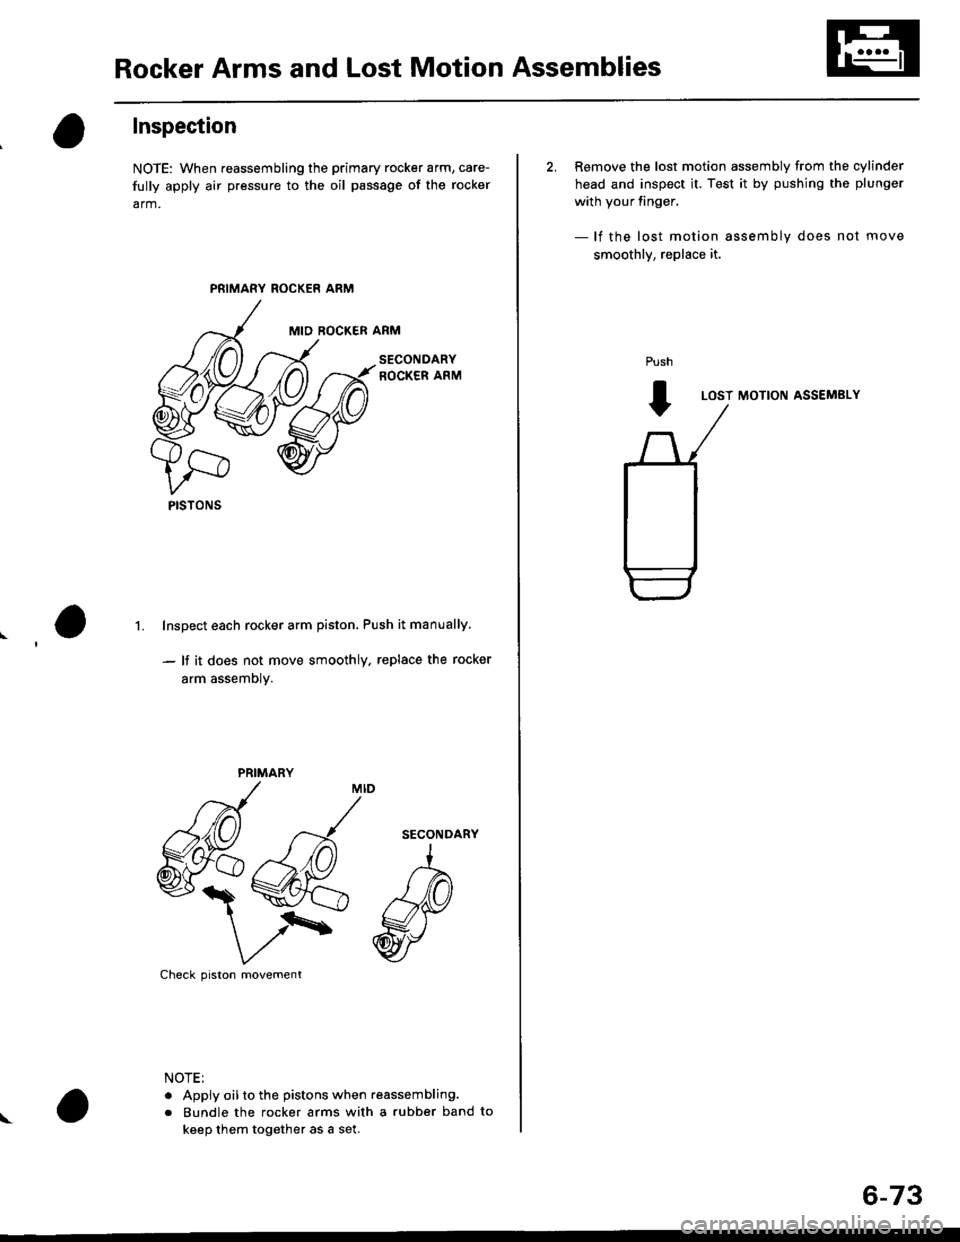 HONDA CIVIC 1996 6.G Service Manual Rocker Arms and Lost Motion Assemblies
Inspection
NOTE: When reassembling the primary rocker arm, care-
fully apply air pressure to the oil passage of the rocker
arm.
PRIMARY ROCKER ARM
MID ROCKER ARM